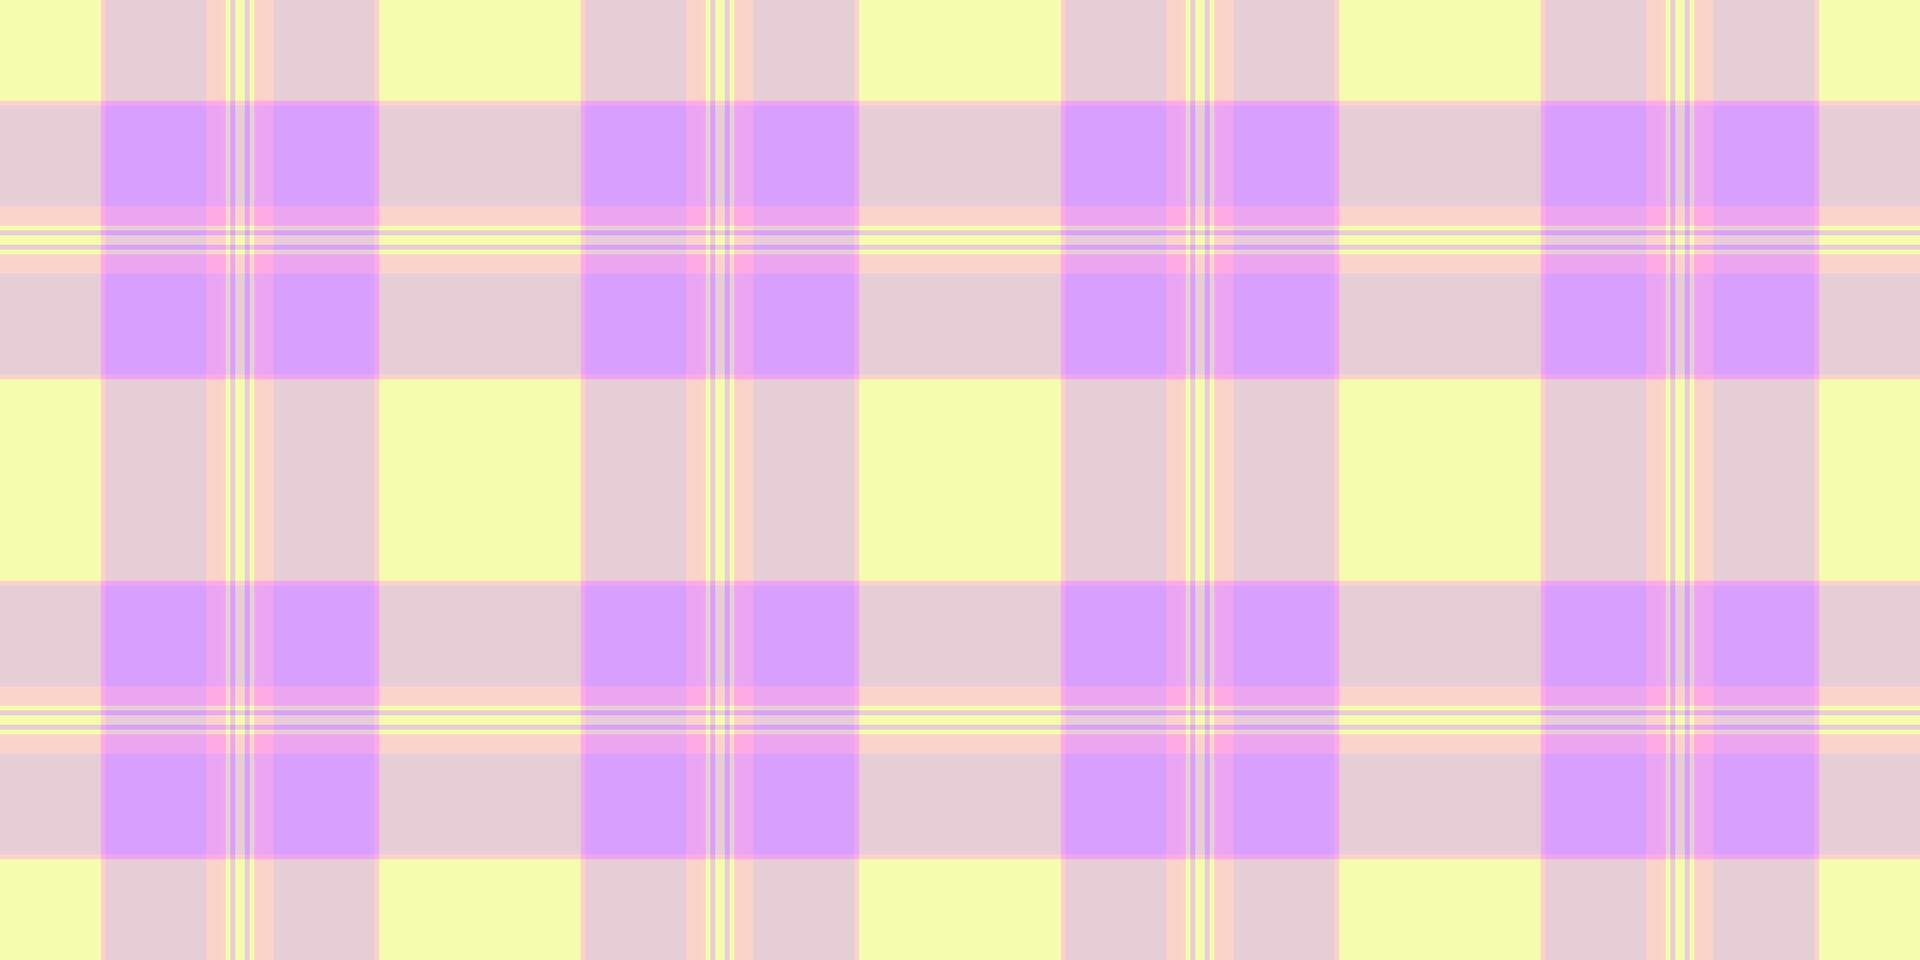 Iconic texture plaid fabric, underwear background vector seamless. Periodic tartan check textile pattern in queen pink and light colors.